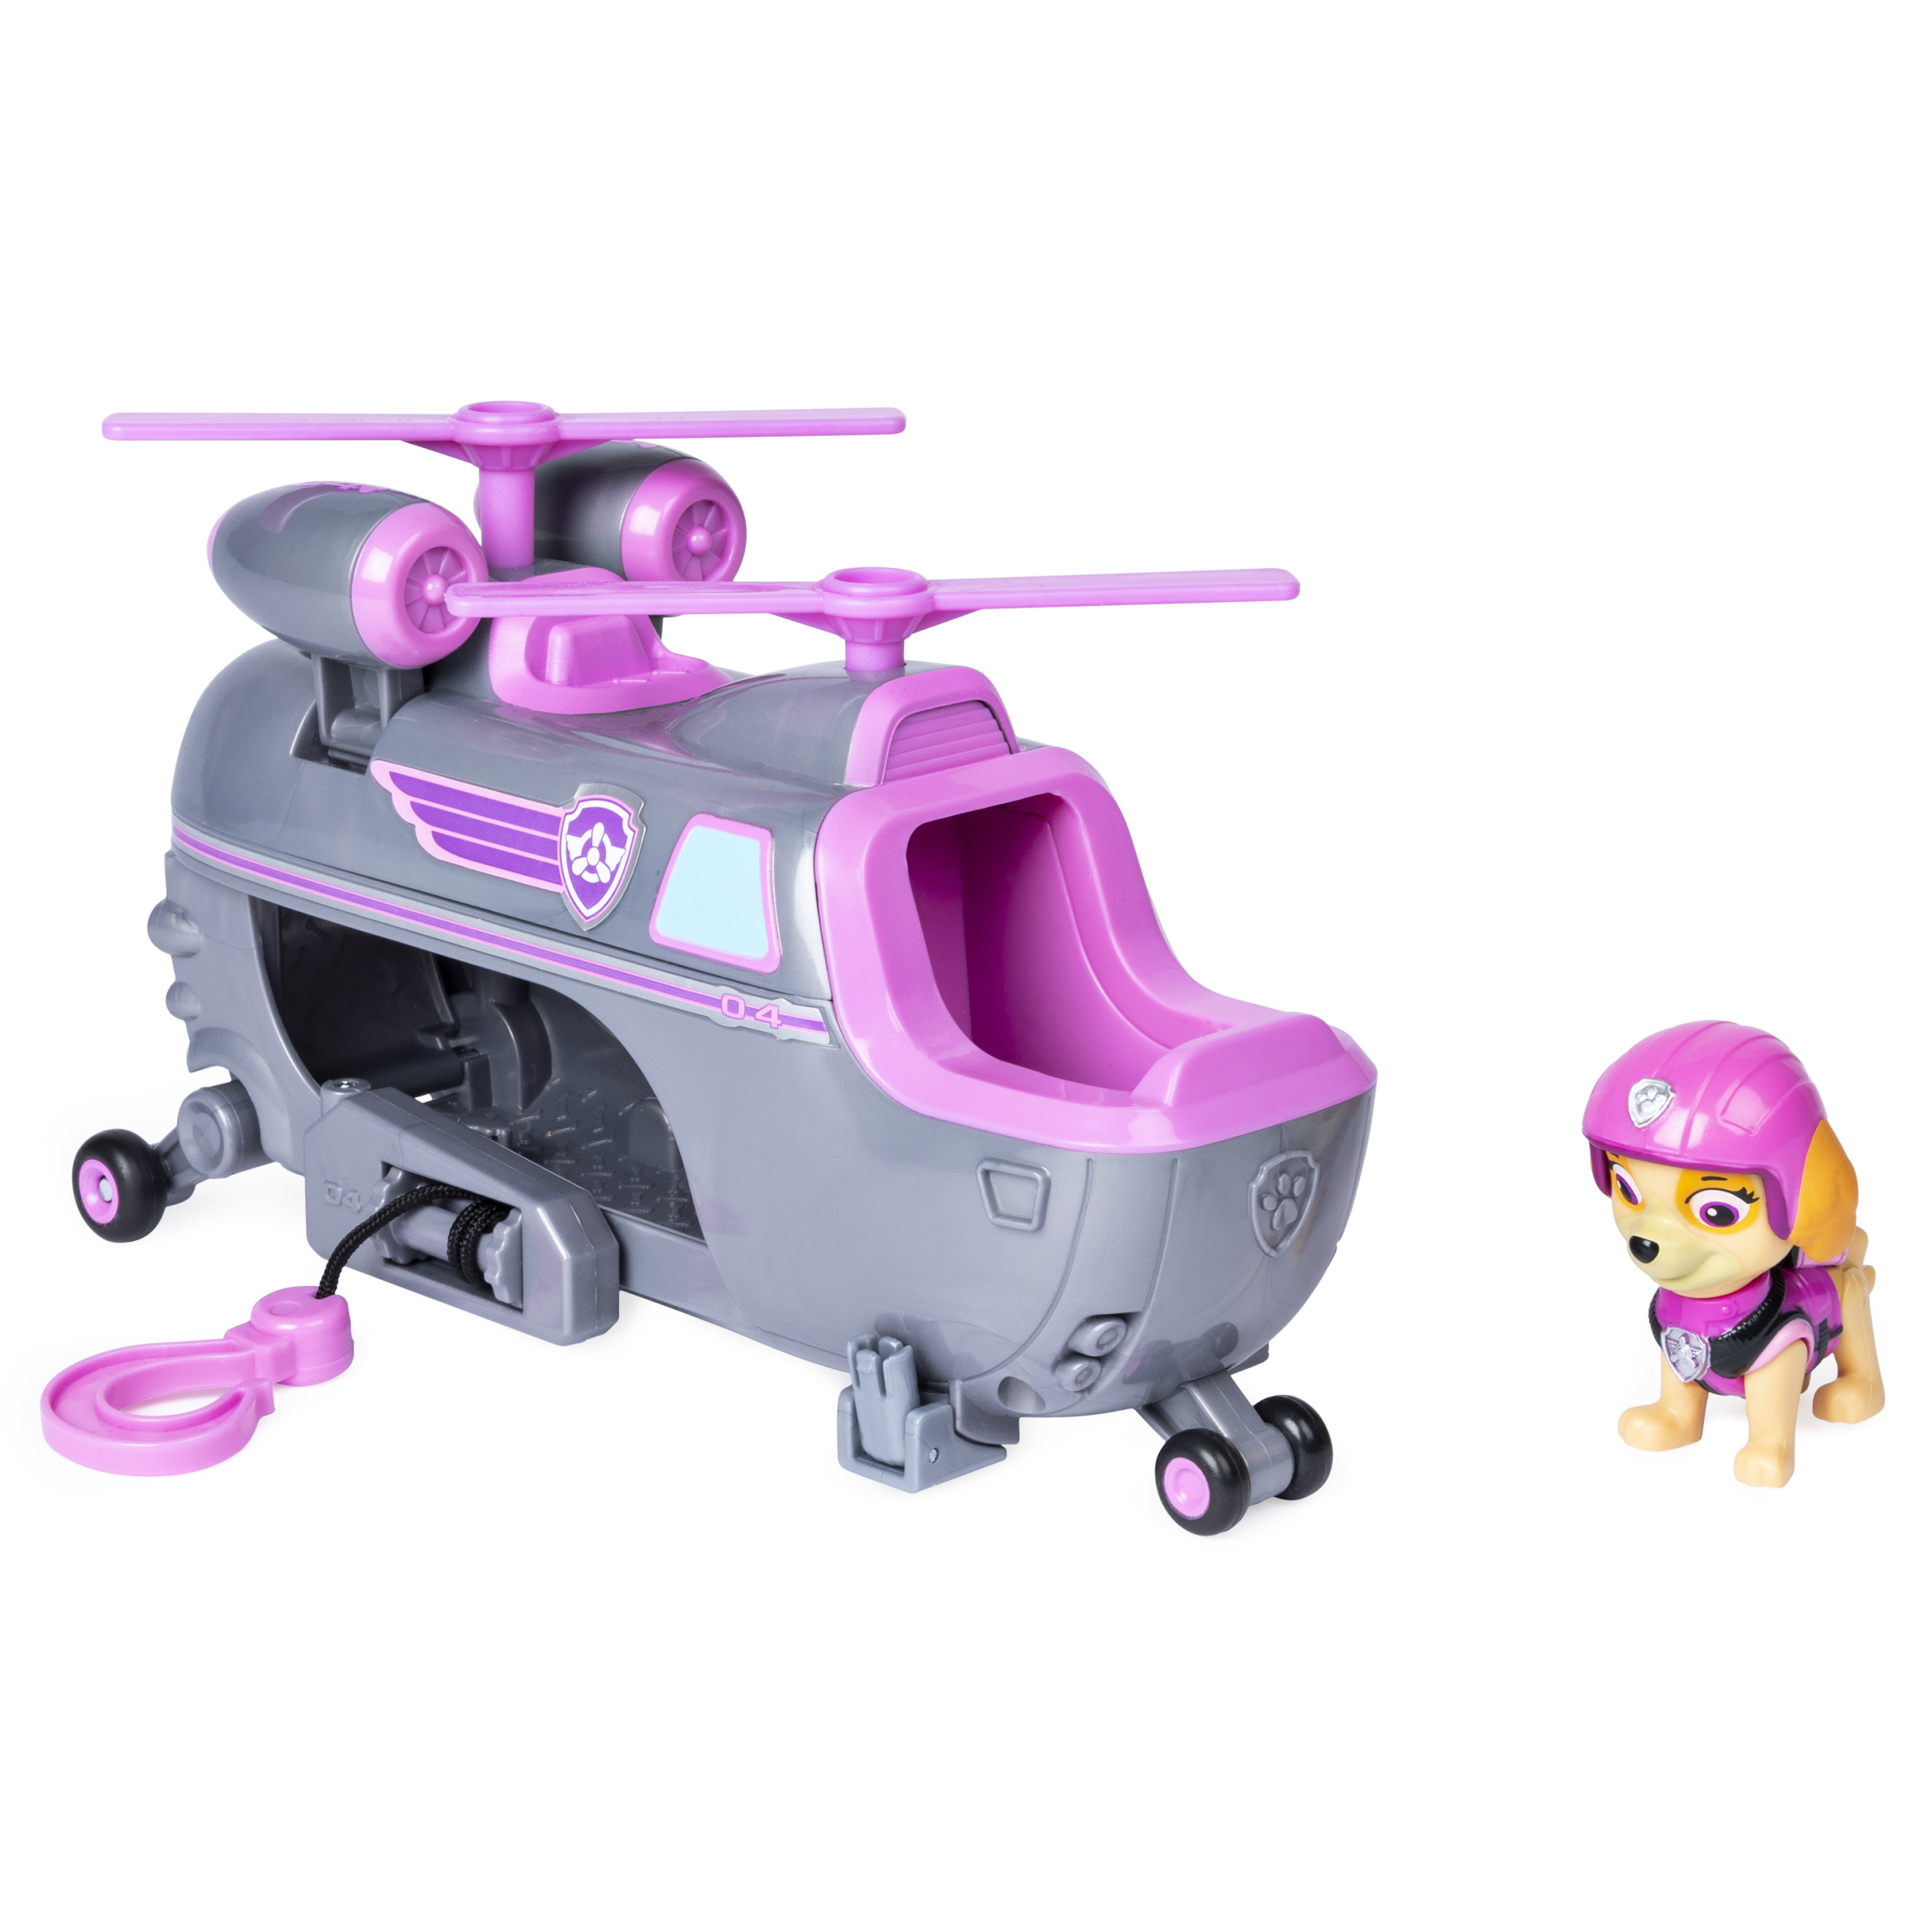 Paw Patrol Ultimate Rescue - Skye’s Ultimate Rescue Helicopter with Moving Propellers and Rescue Hook, for Ages 3 and Up - image 1 of 6